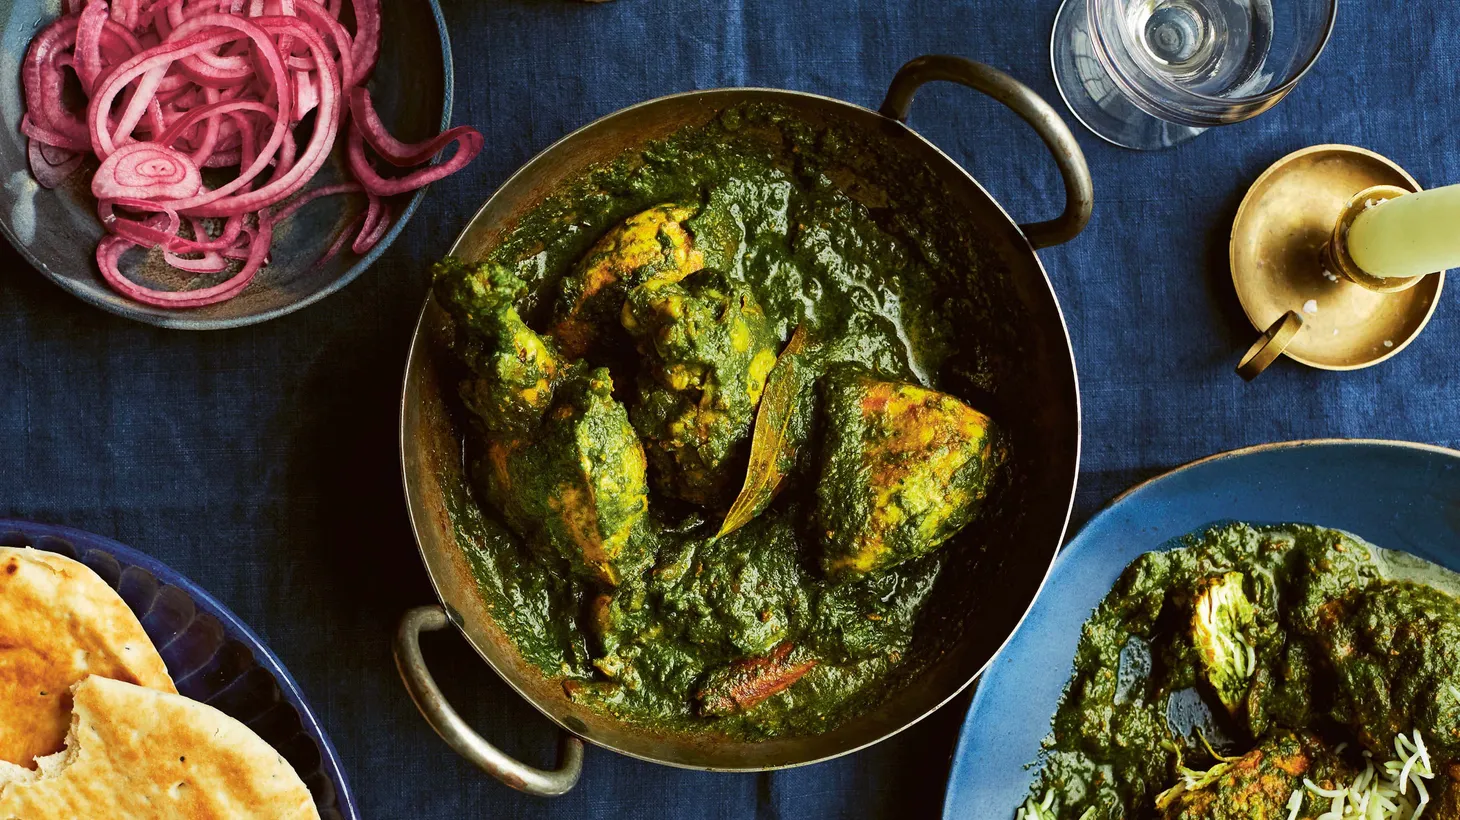 Marrying green, leafy vegetables with meat is the hallmark of North Indian cooking. This classic palak, or spinach and chicken curry, is spiced with ginger, coriander, and garam masala, and is often included in thalis of the region.